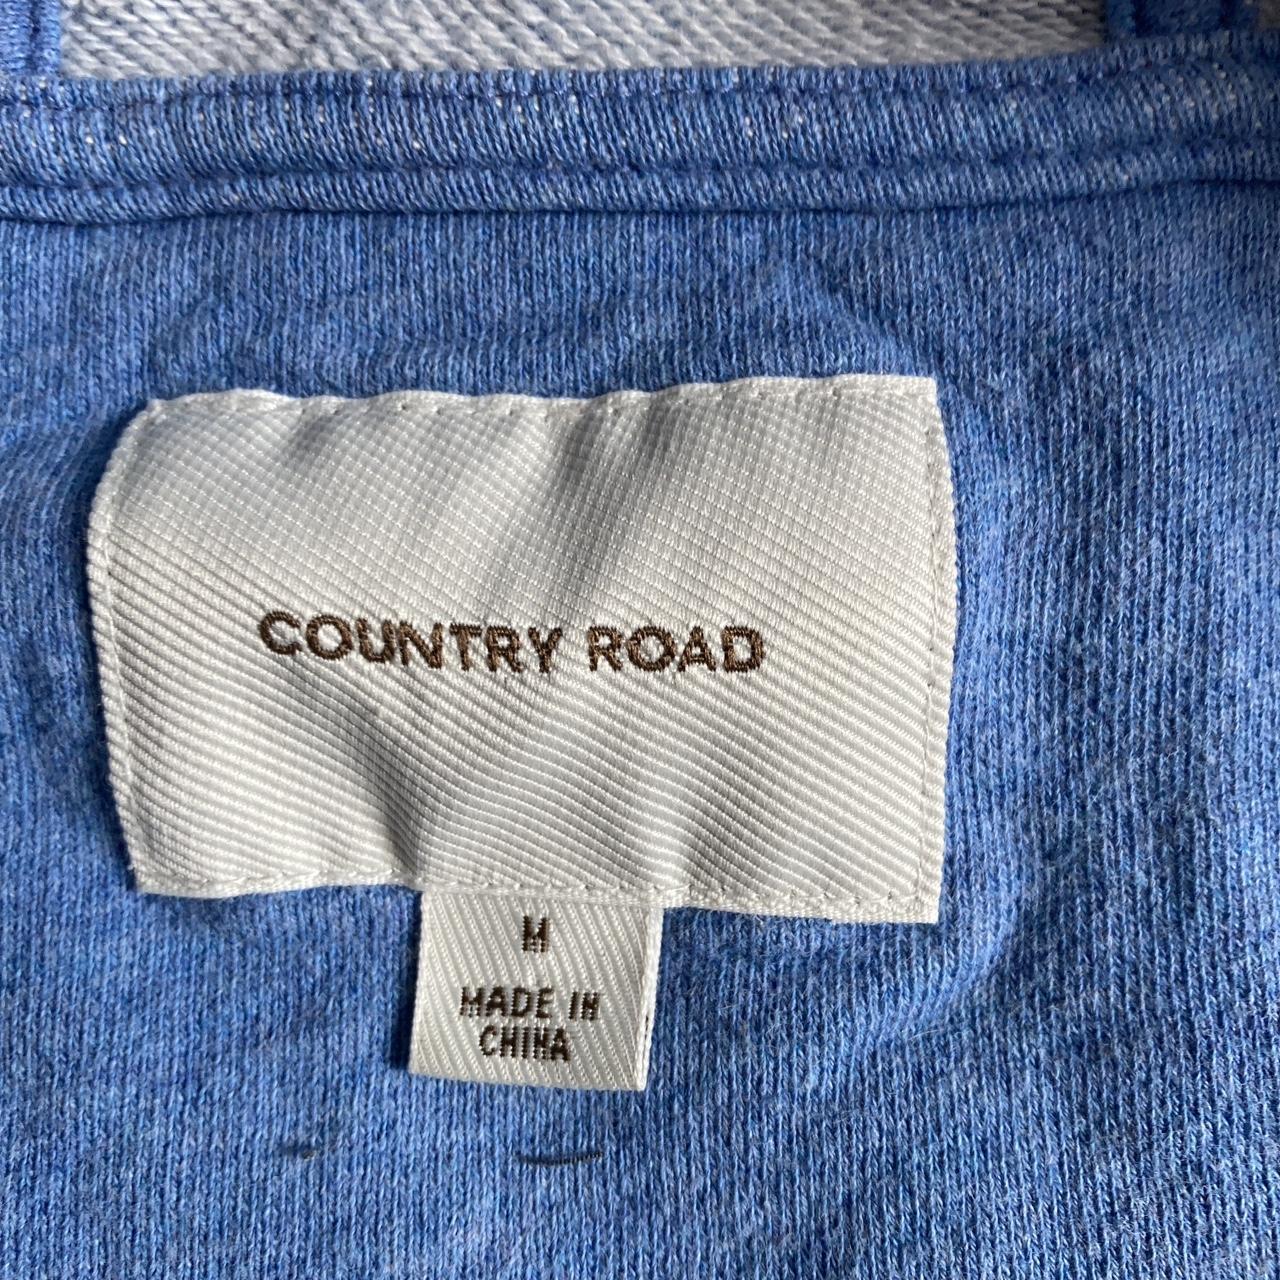 Free shipping Country road zip hoodle in light blue. - Depop